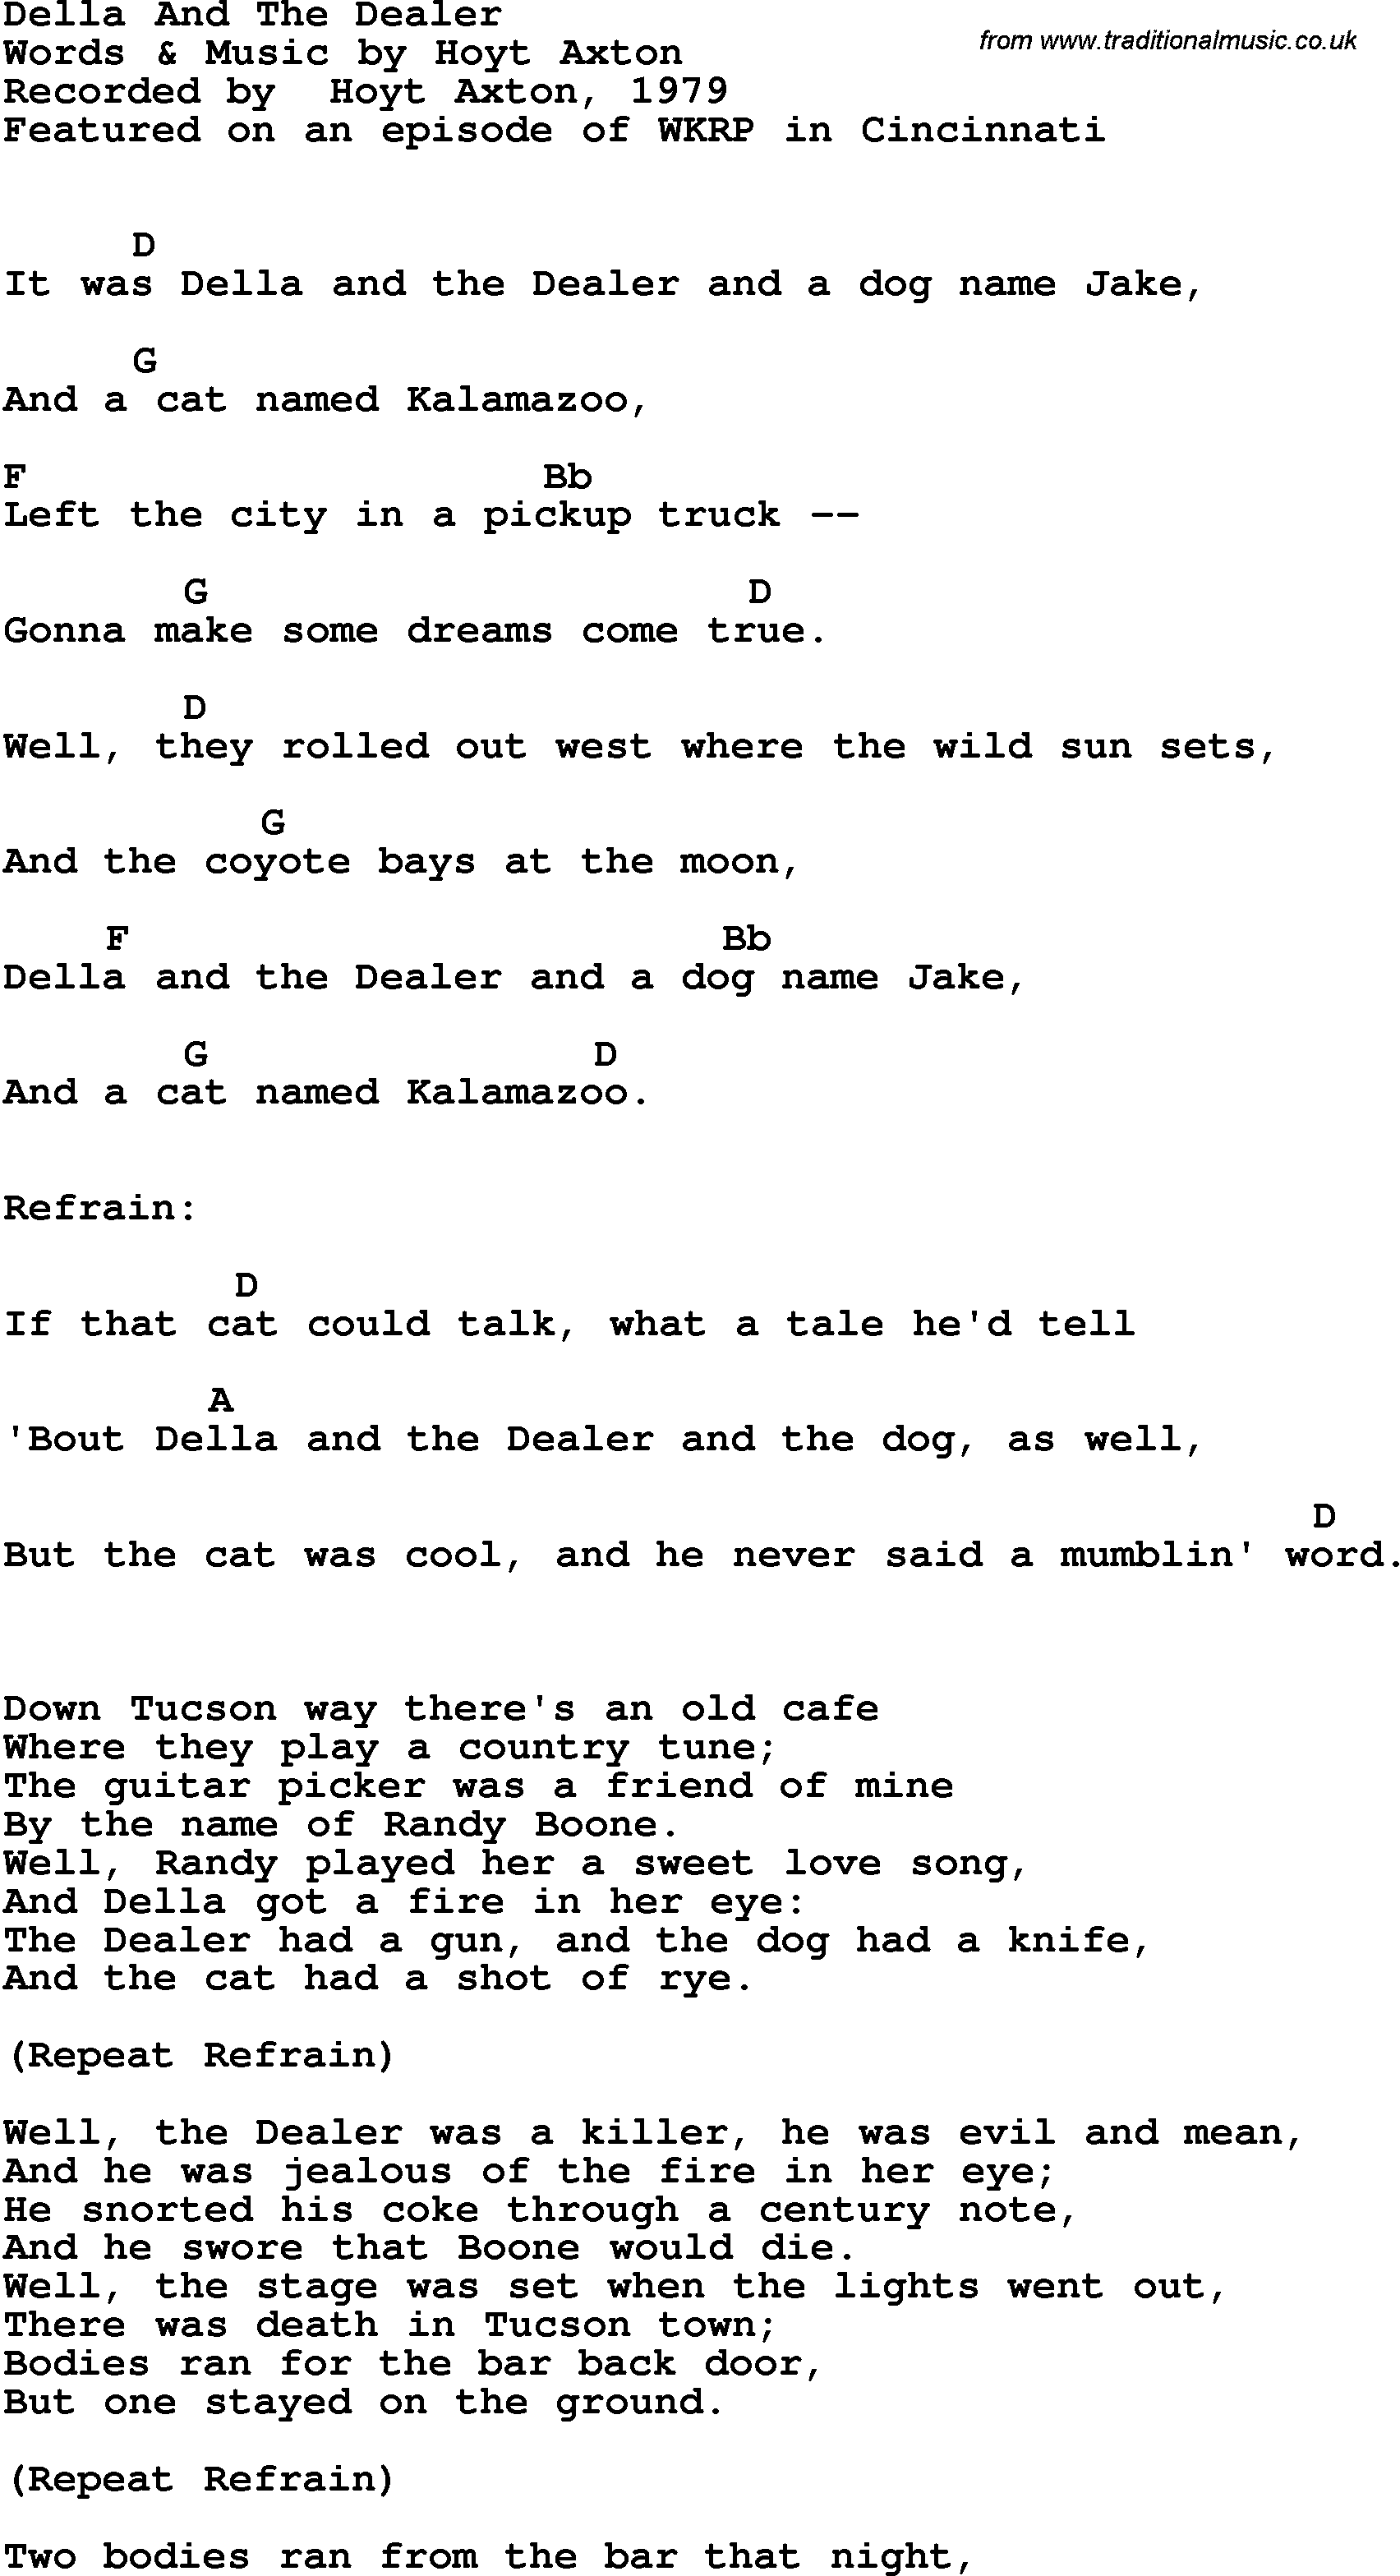 Song Lyrics with guitar chords for Della And The Dealer - Hoyt Axton, 1979